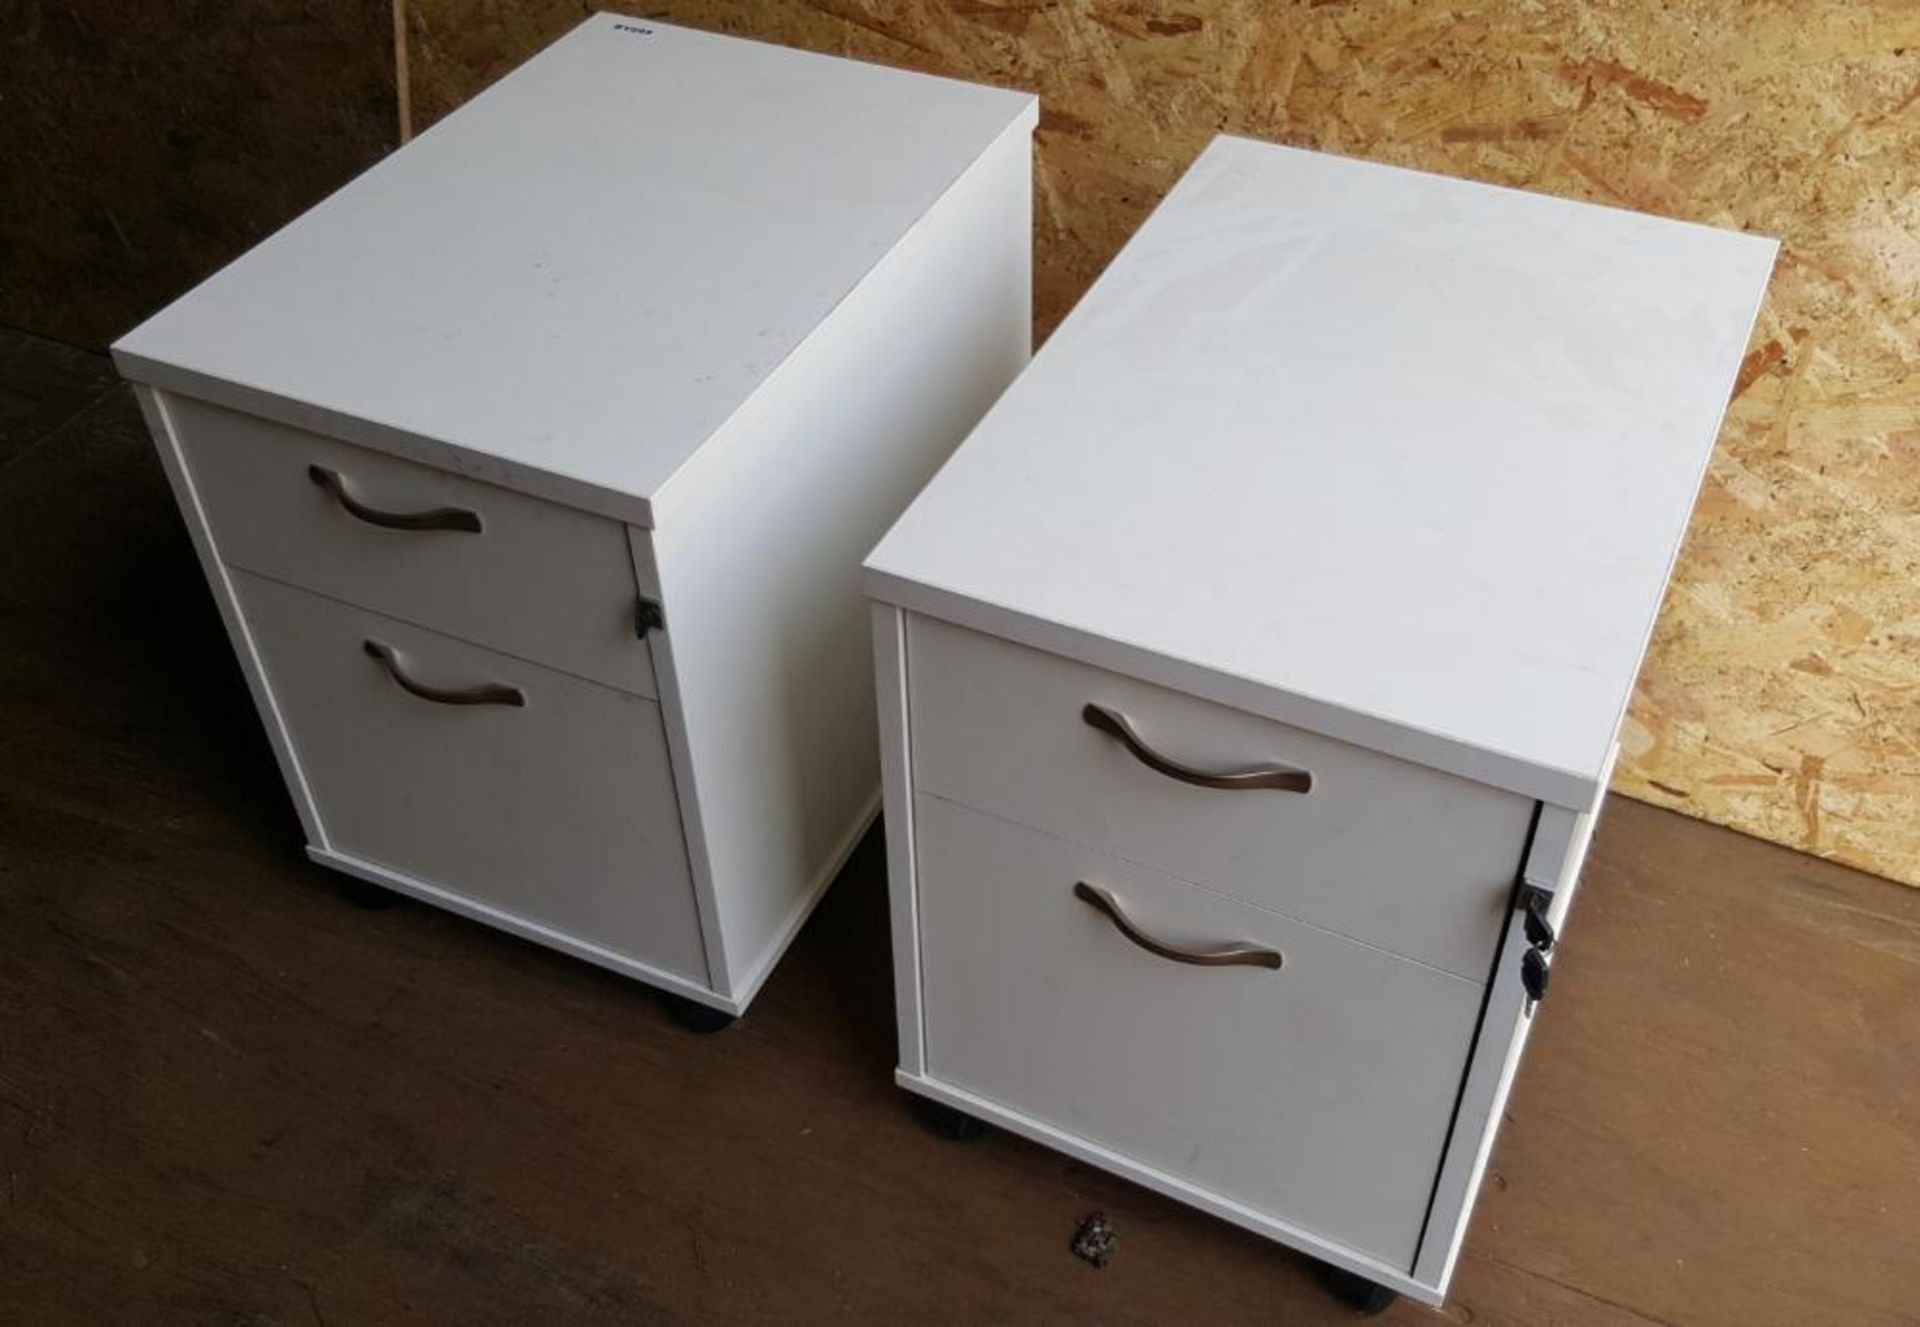 Matching Pair Of Mobile Under-Counter Wooden Lockable Office Drawers In White On Castors - Ref BY294 - Image 3 of 4